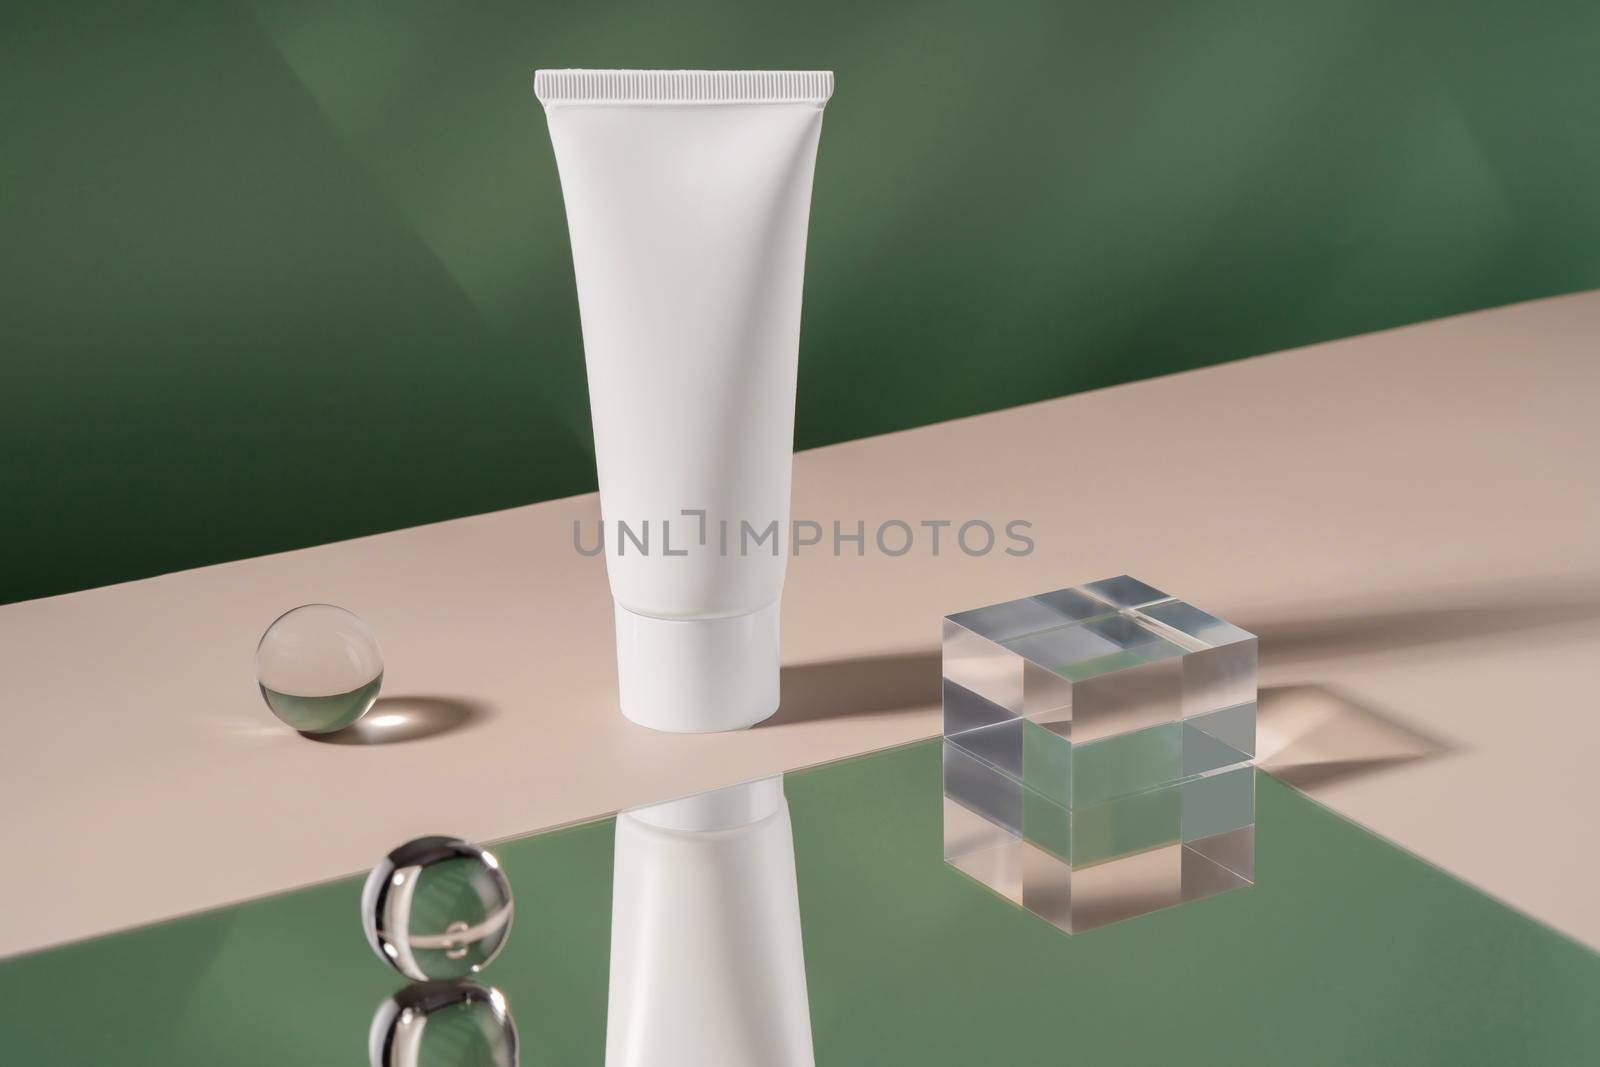 Showcase cosmetics mock up for advertising, cosmetics stand, branding scene with ball and mirror, shadow light. Cosmetic cream mockup showcase product presentation. Green backdrop by photolime